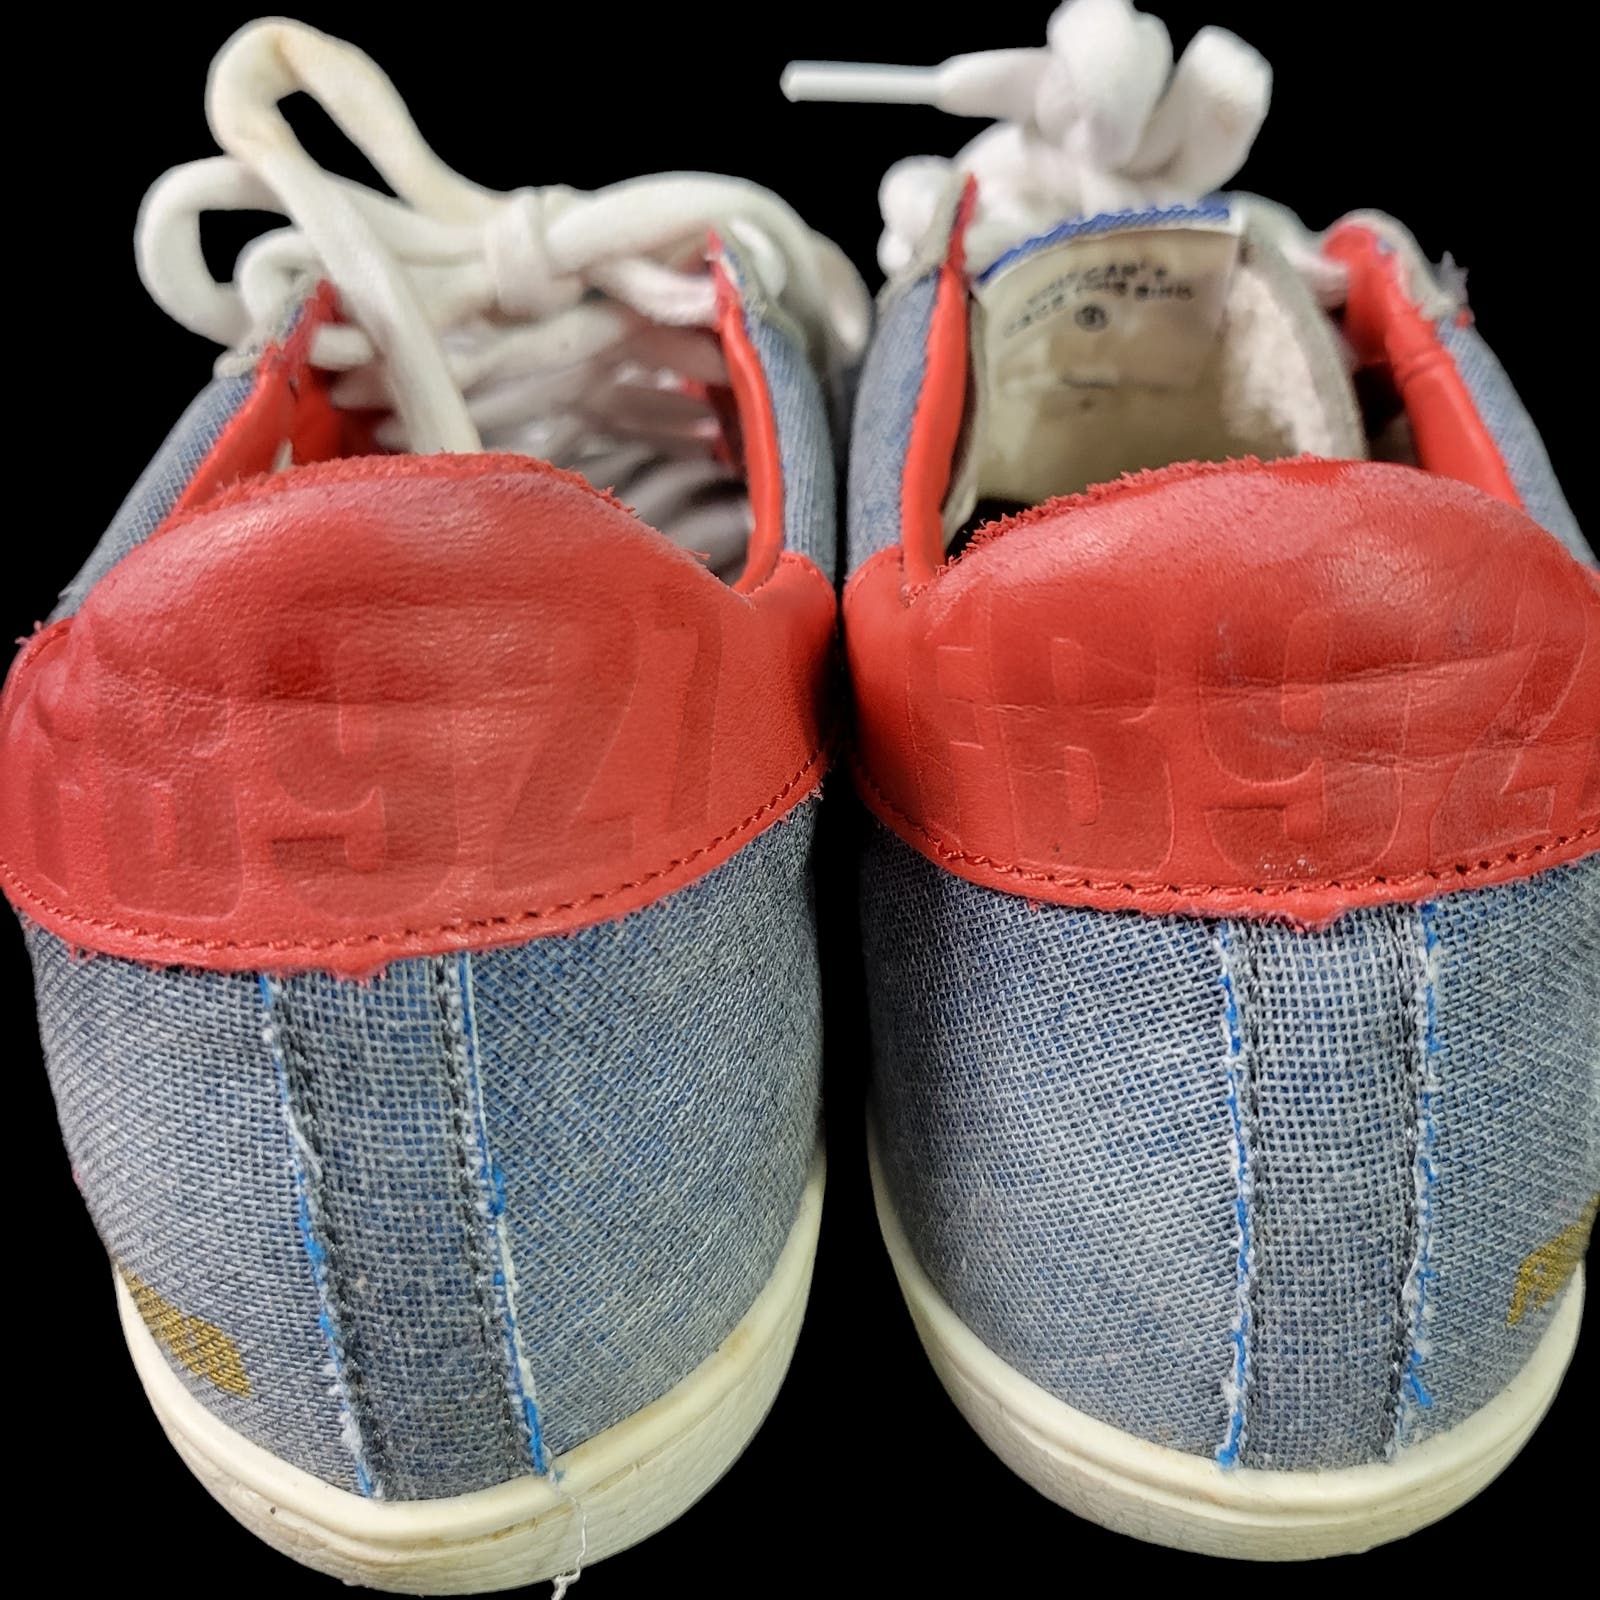 Freebird by Steven Sneakers Blue Denim FB 927 Low Top Suede Canvas Star Distressed Size 7